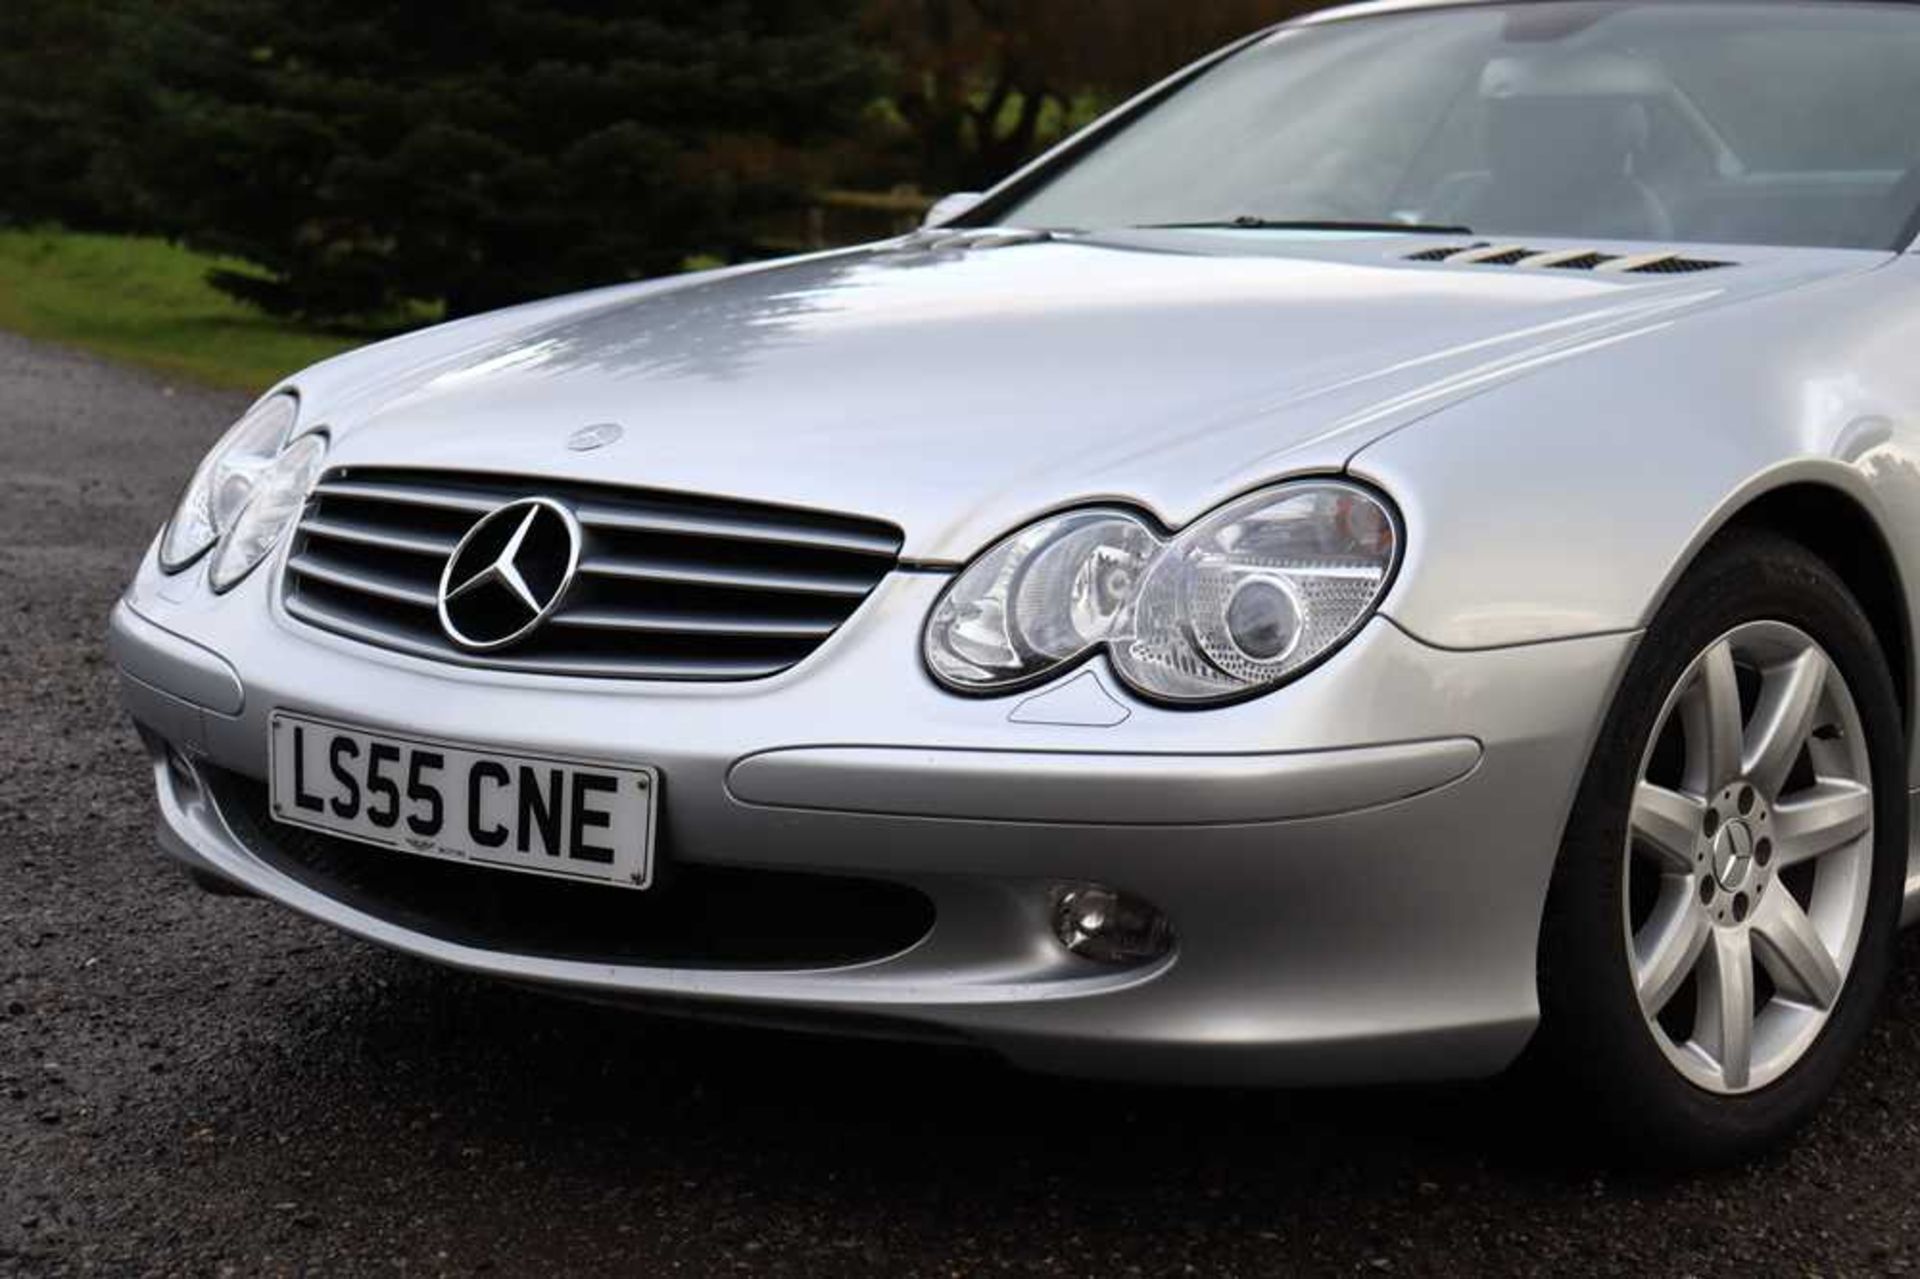 2005 Mercedes-Benz SL 350 Just 34,800 miles from new - Image 22 of 75